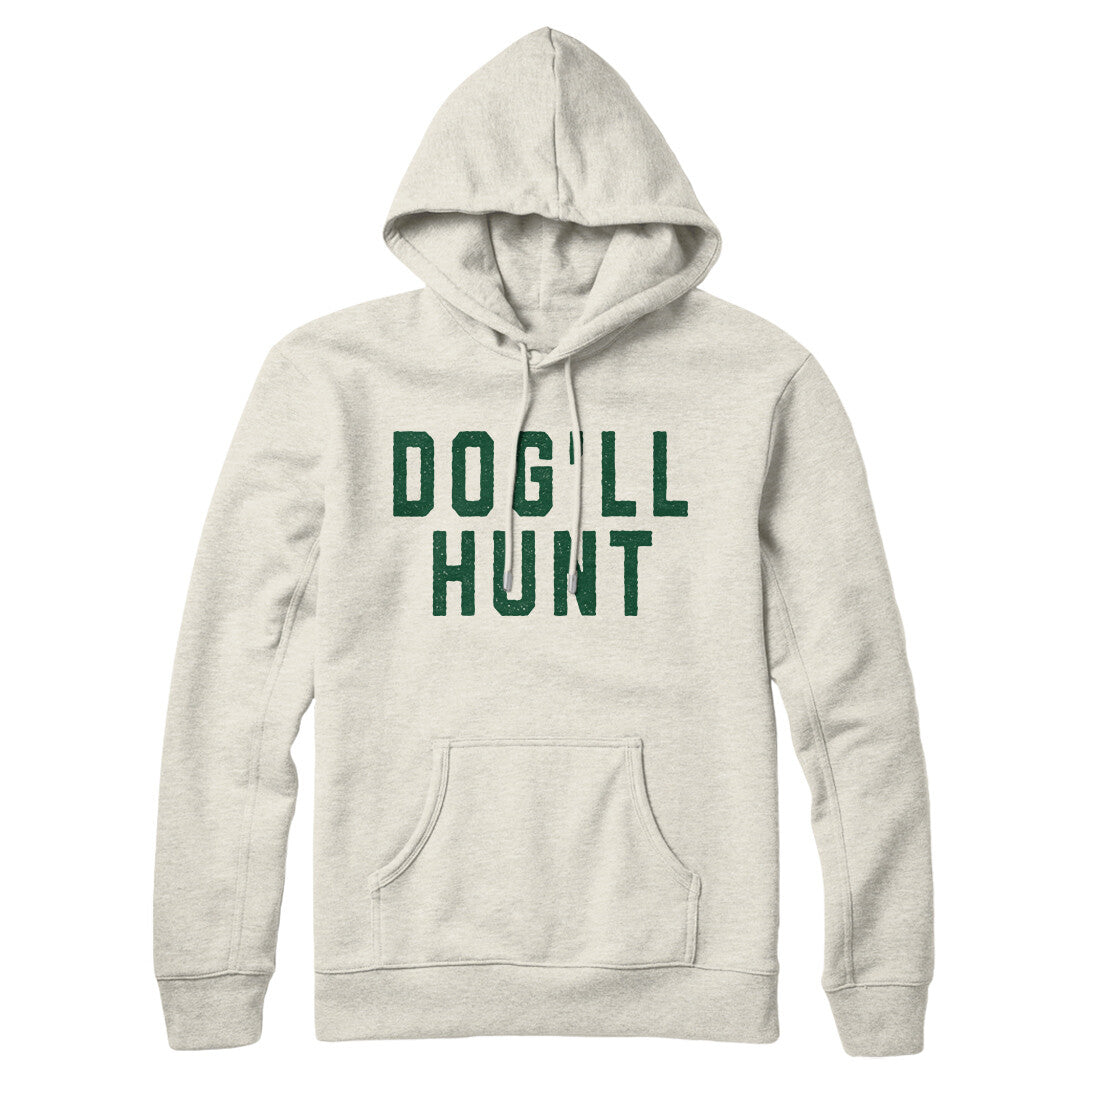 Dog’ll Hunt in Heather Oatmeal Color